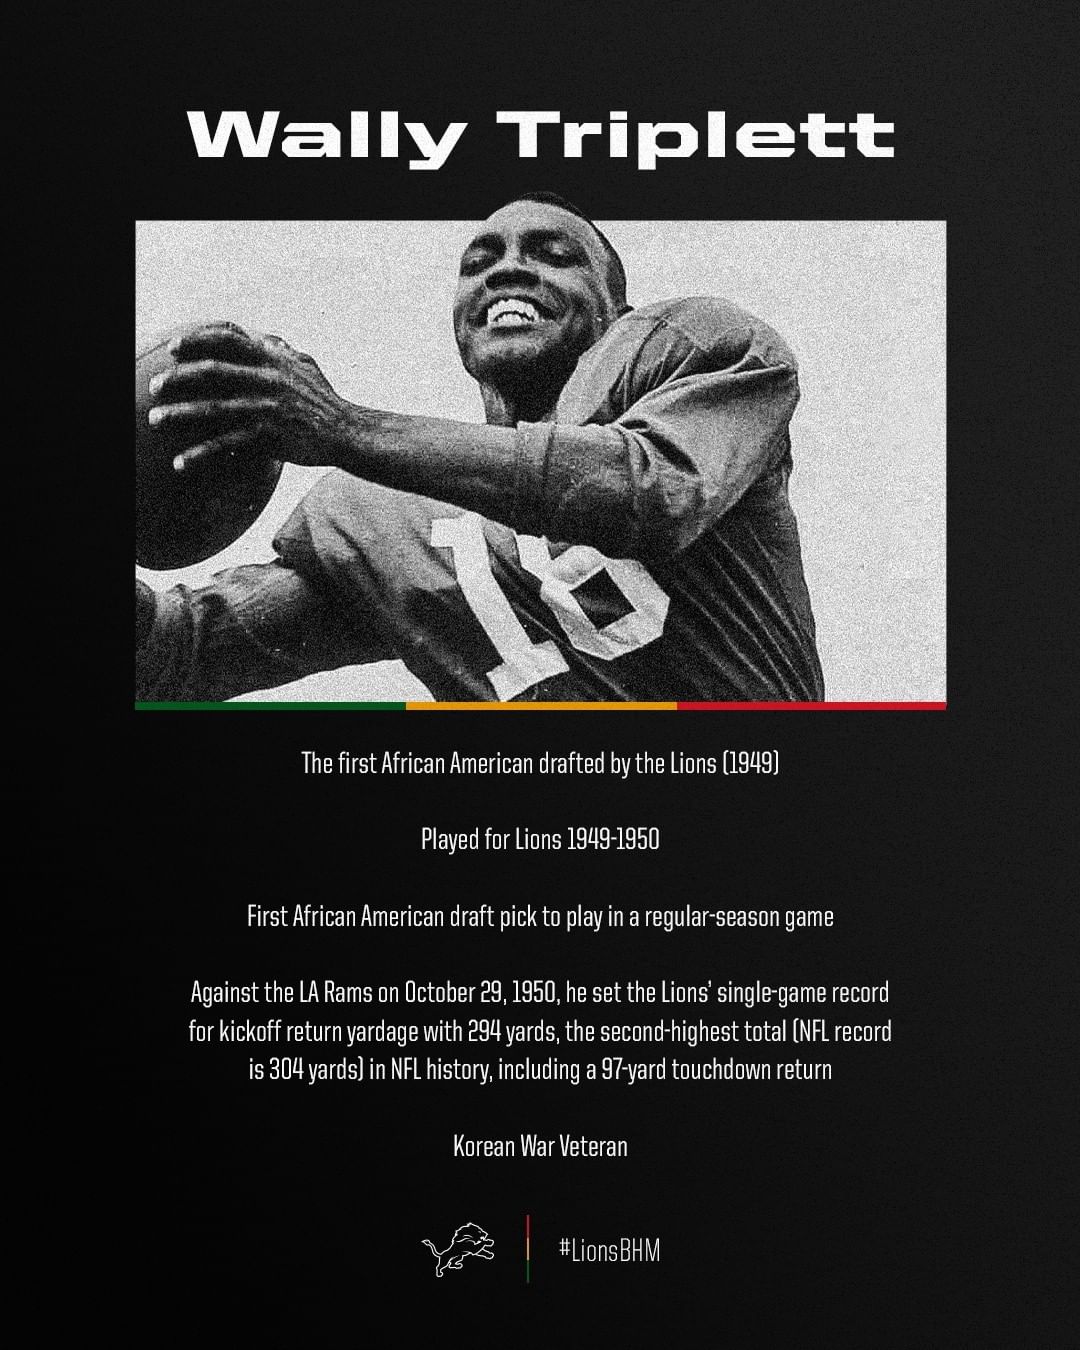 Pay homage: Wally Triplett was the first Black player drafted by the National Fo...